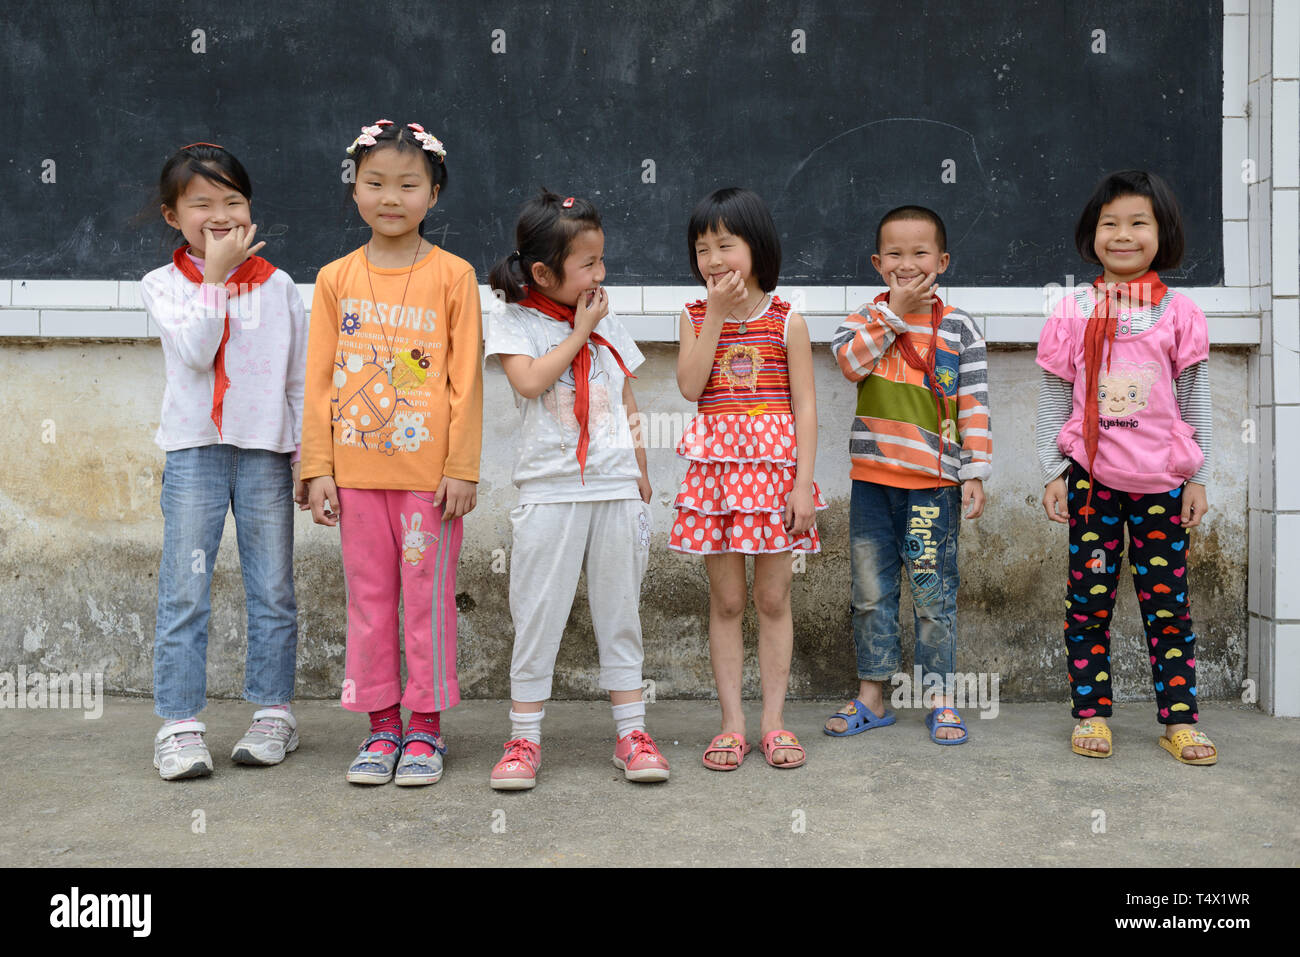 Primary age school children line up for a photo, laughing and playing, in the school playground in rural Guangxi region, central southern China. Stock Photo